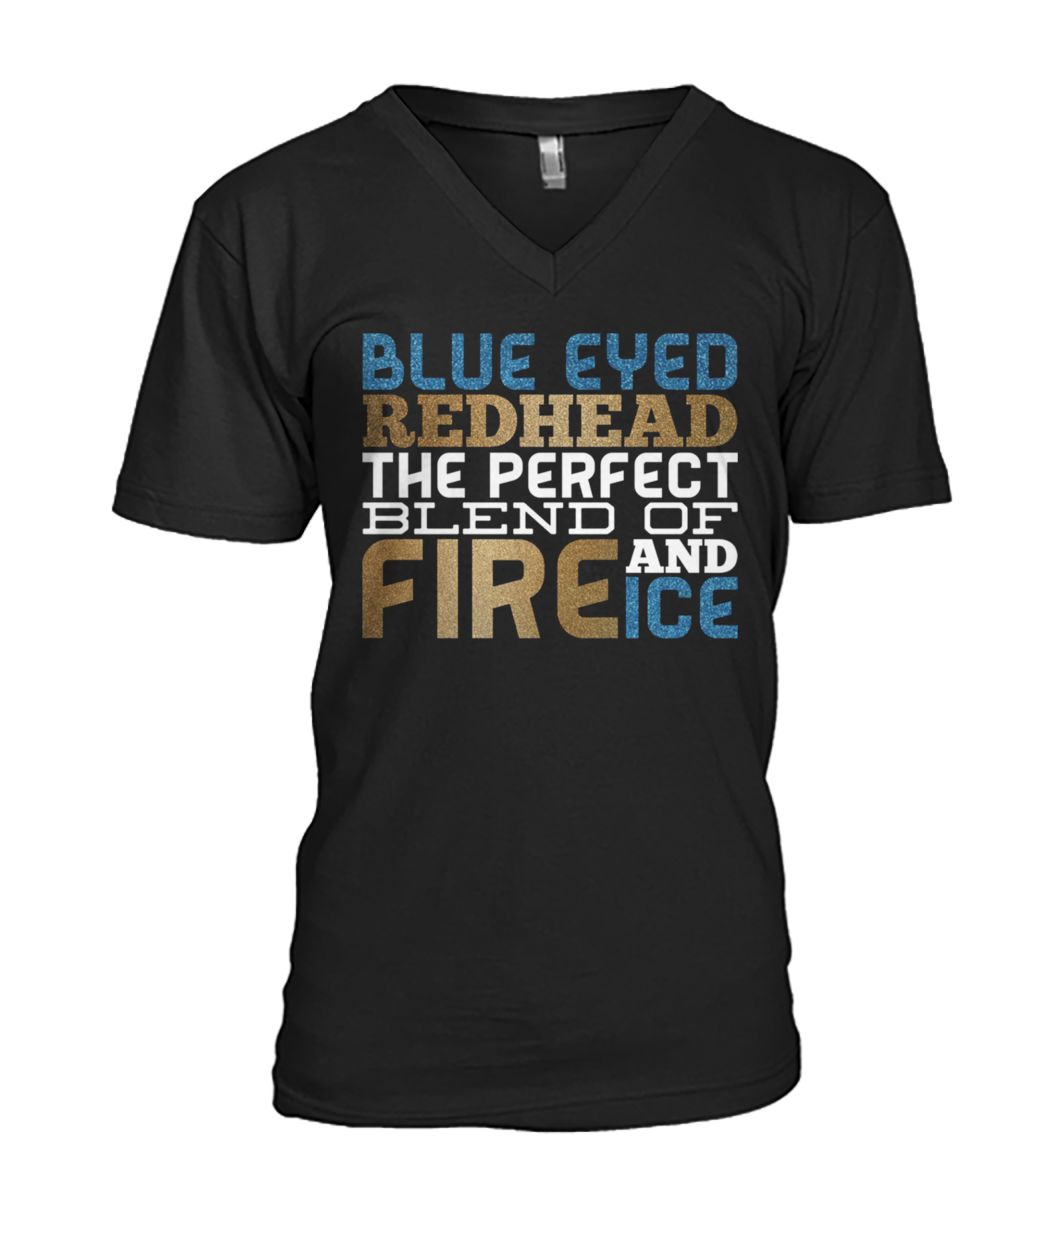 Blue eyed redhead the perfect blend of fire and ice mens v-neck